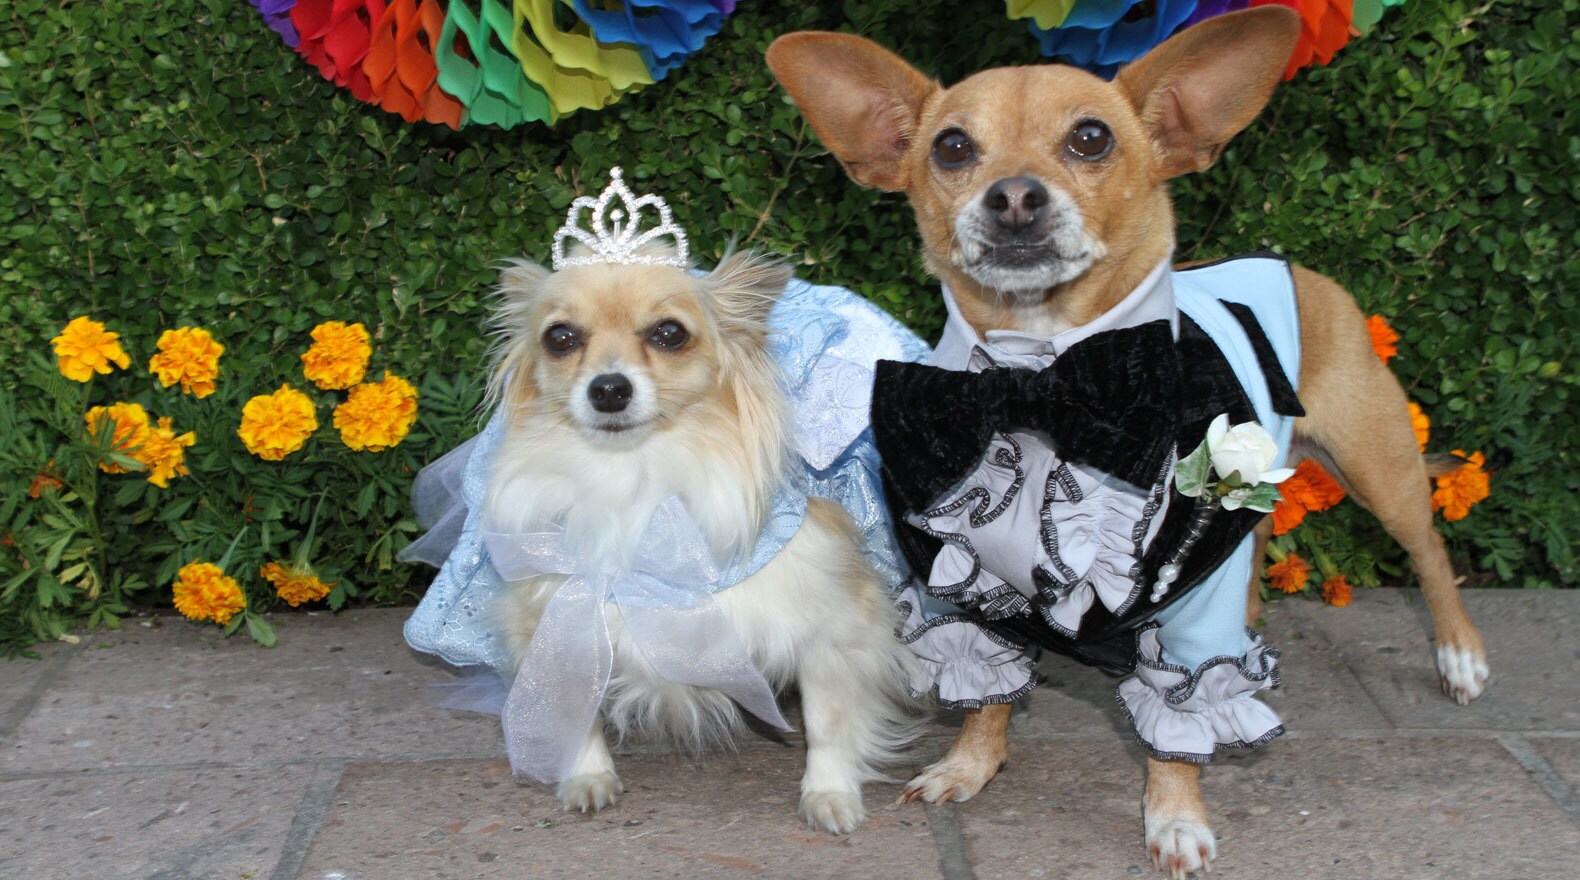 Two chihuahuas dressed up as bride and groom